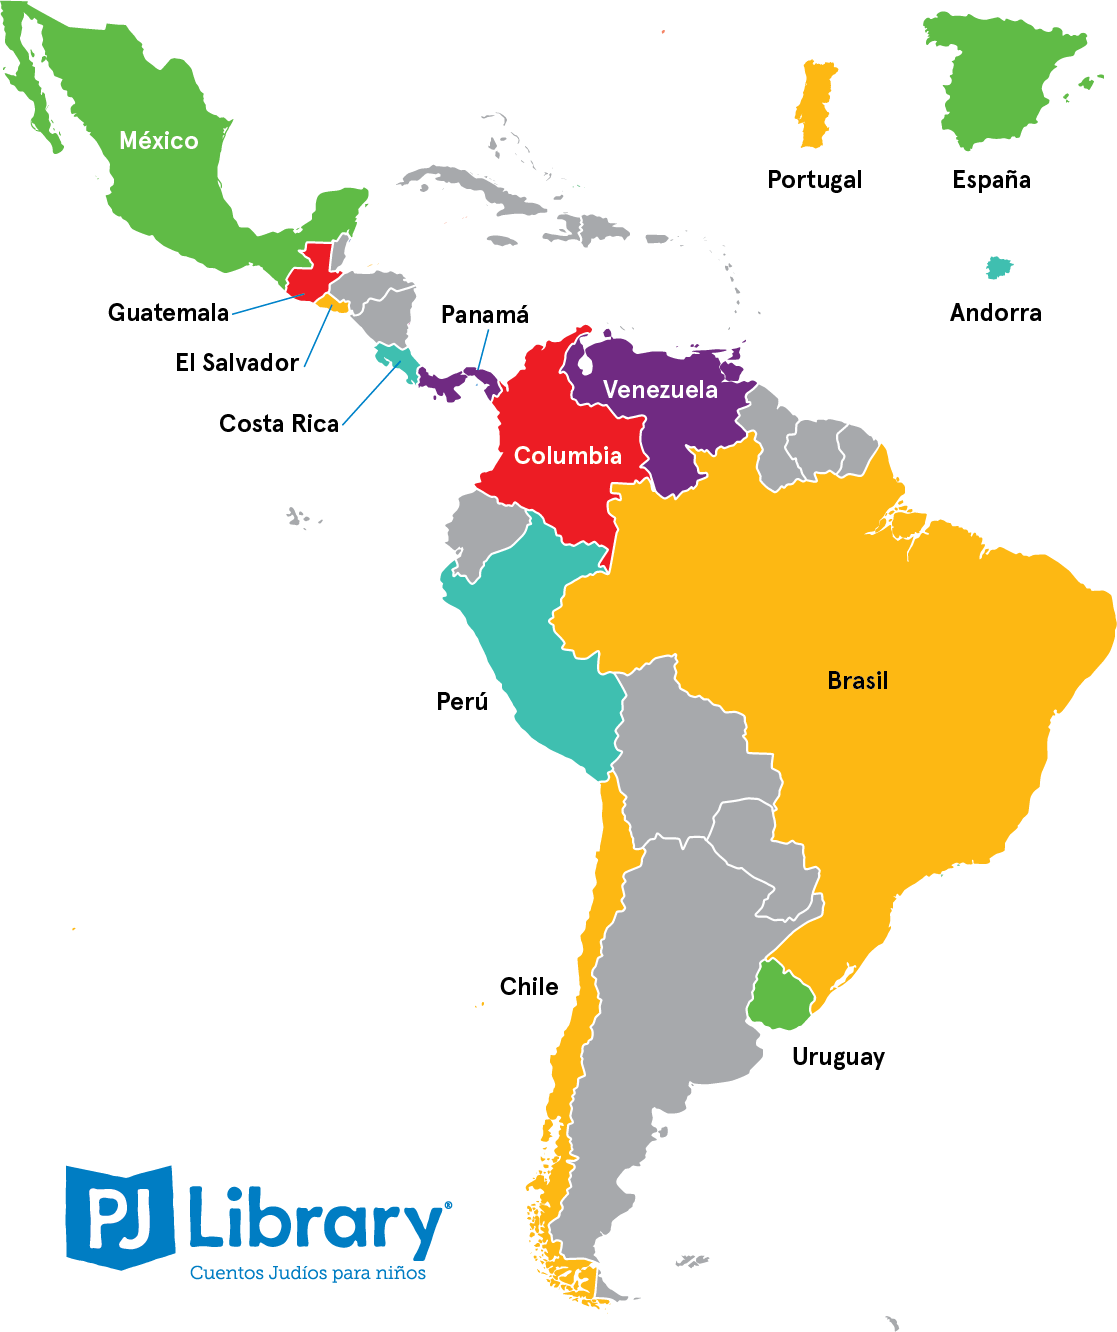 A map of South America